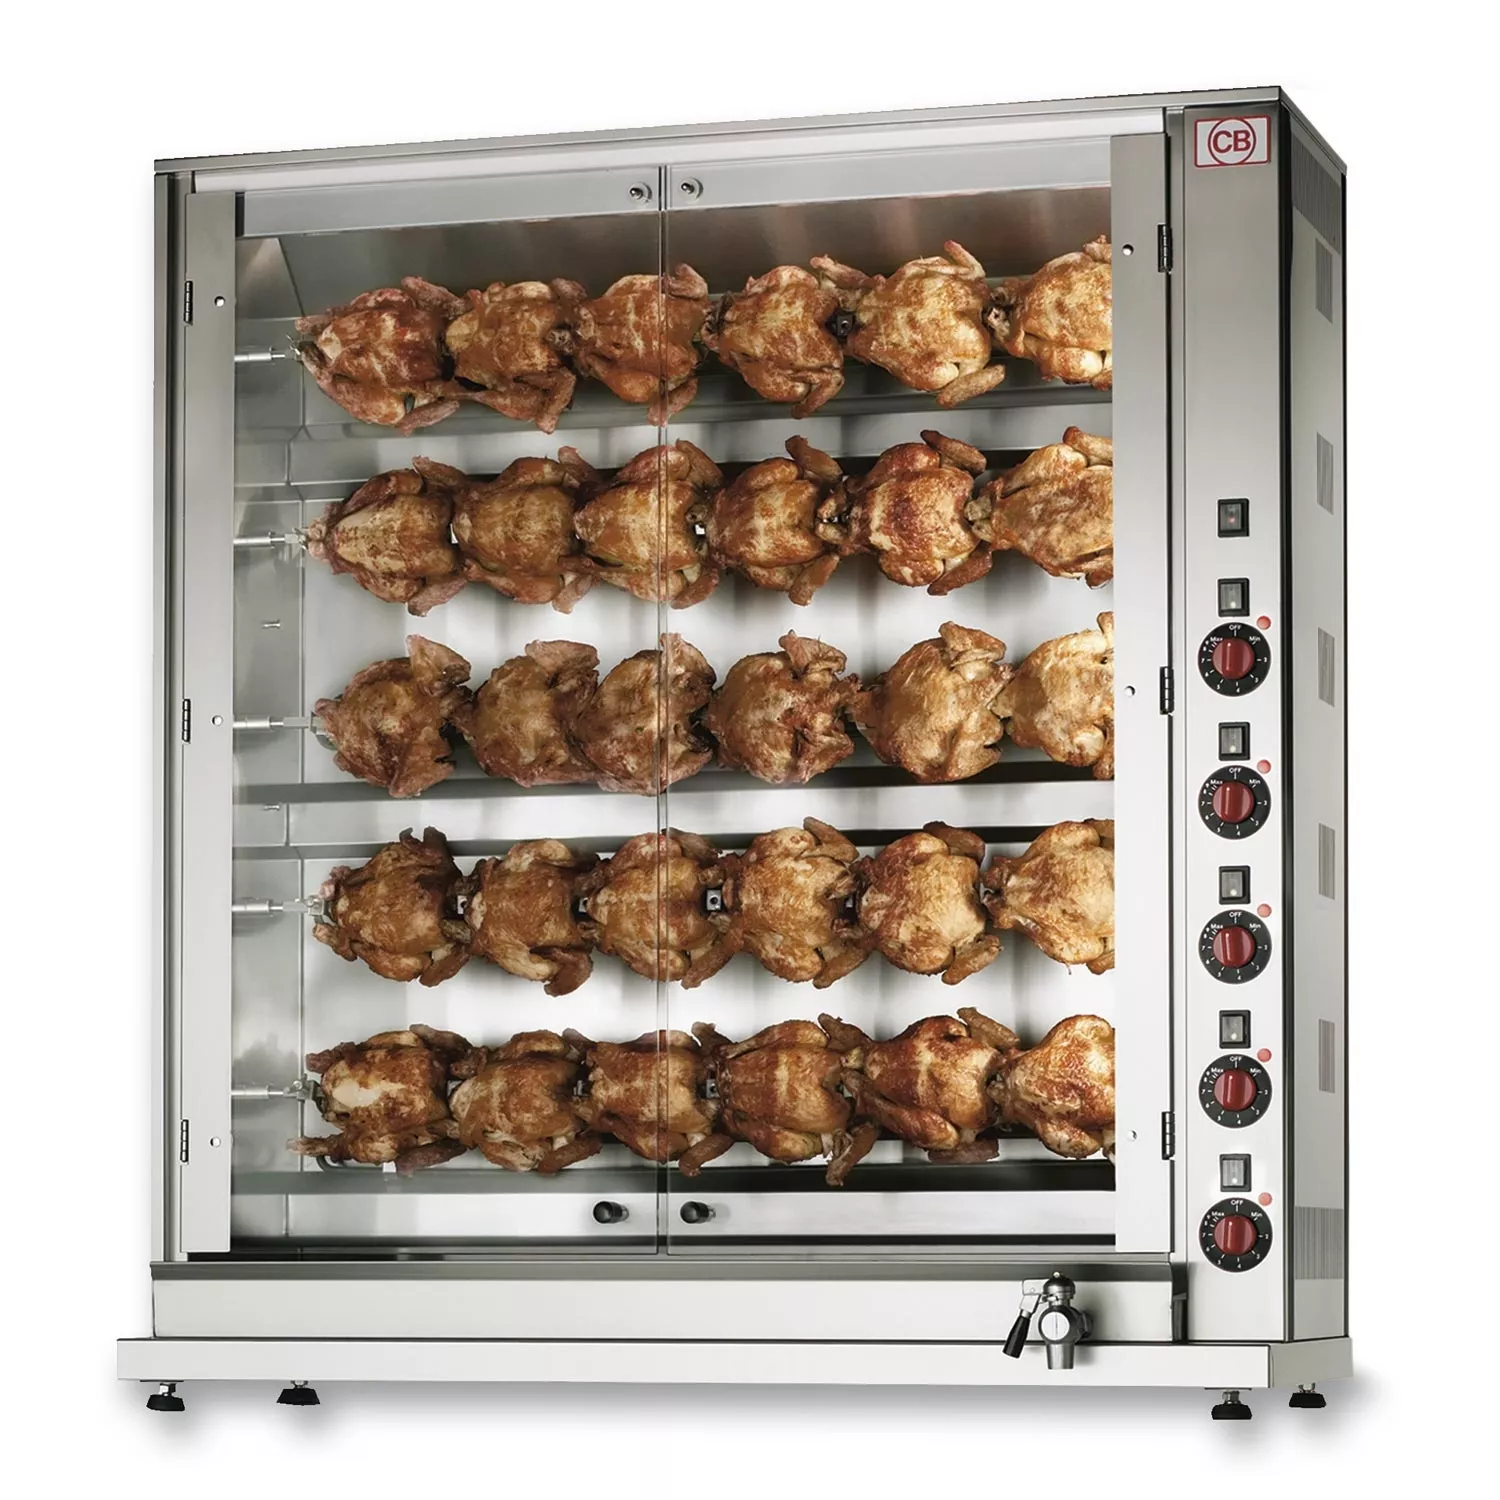 Electric chicken-spit roaster - 5 spits №: E-30P-S5 #6700 - Robusta